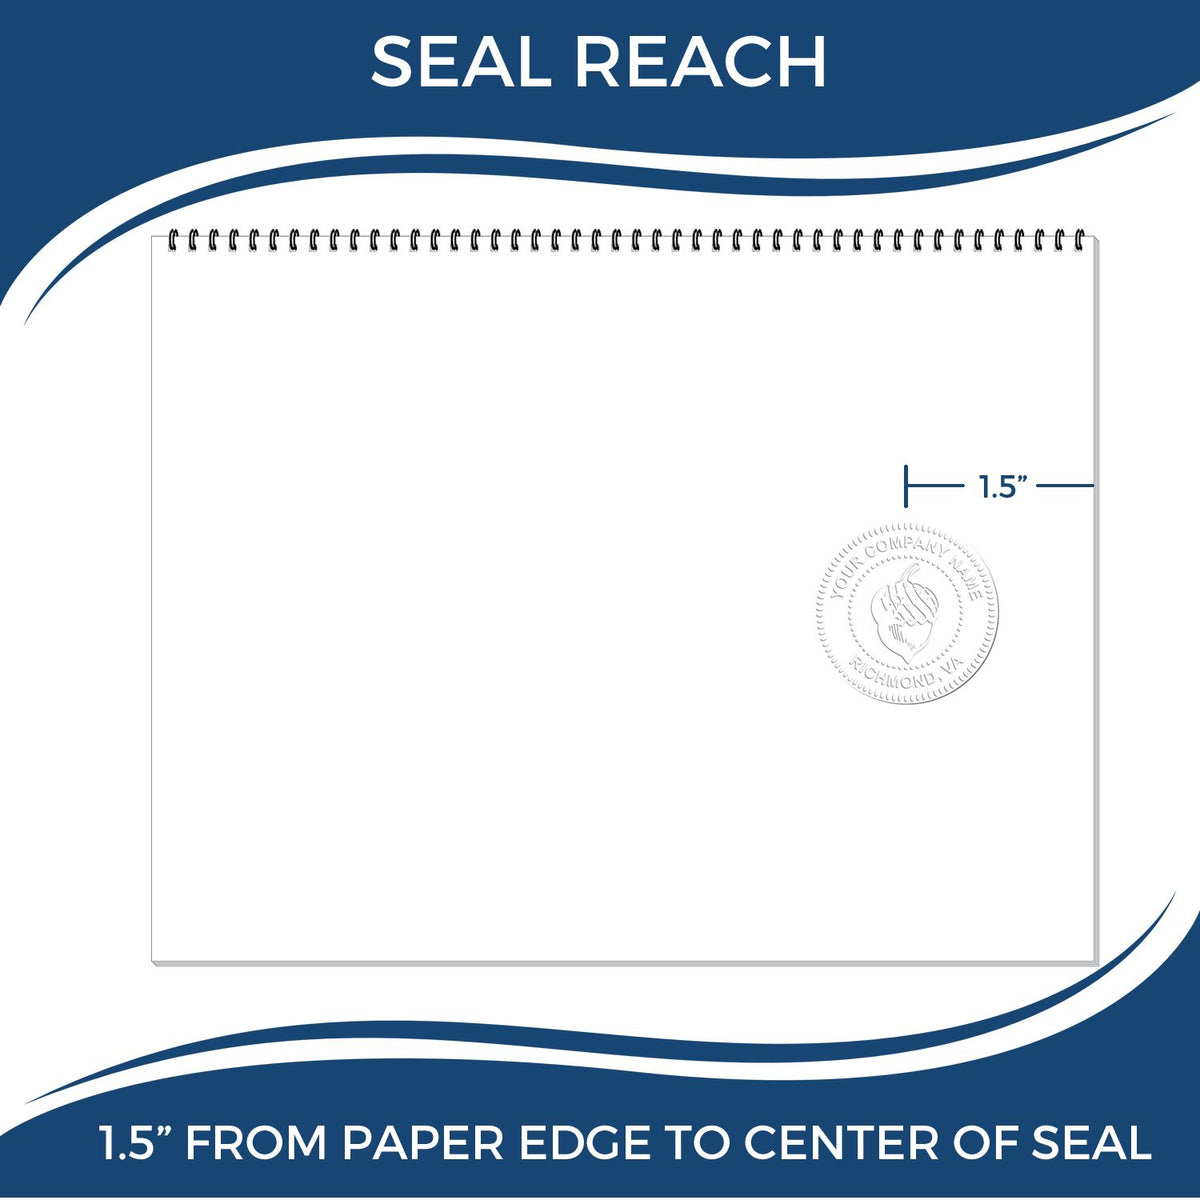 An infographic showing the seal reach which is represented by a ruler and a miniature seal image of the Nebraska Geologist Desk Seal